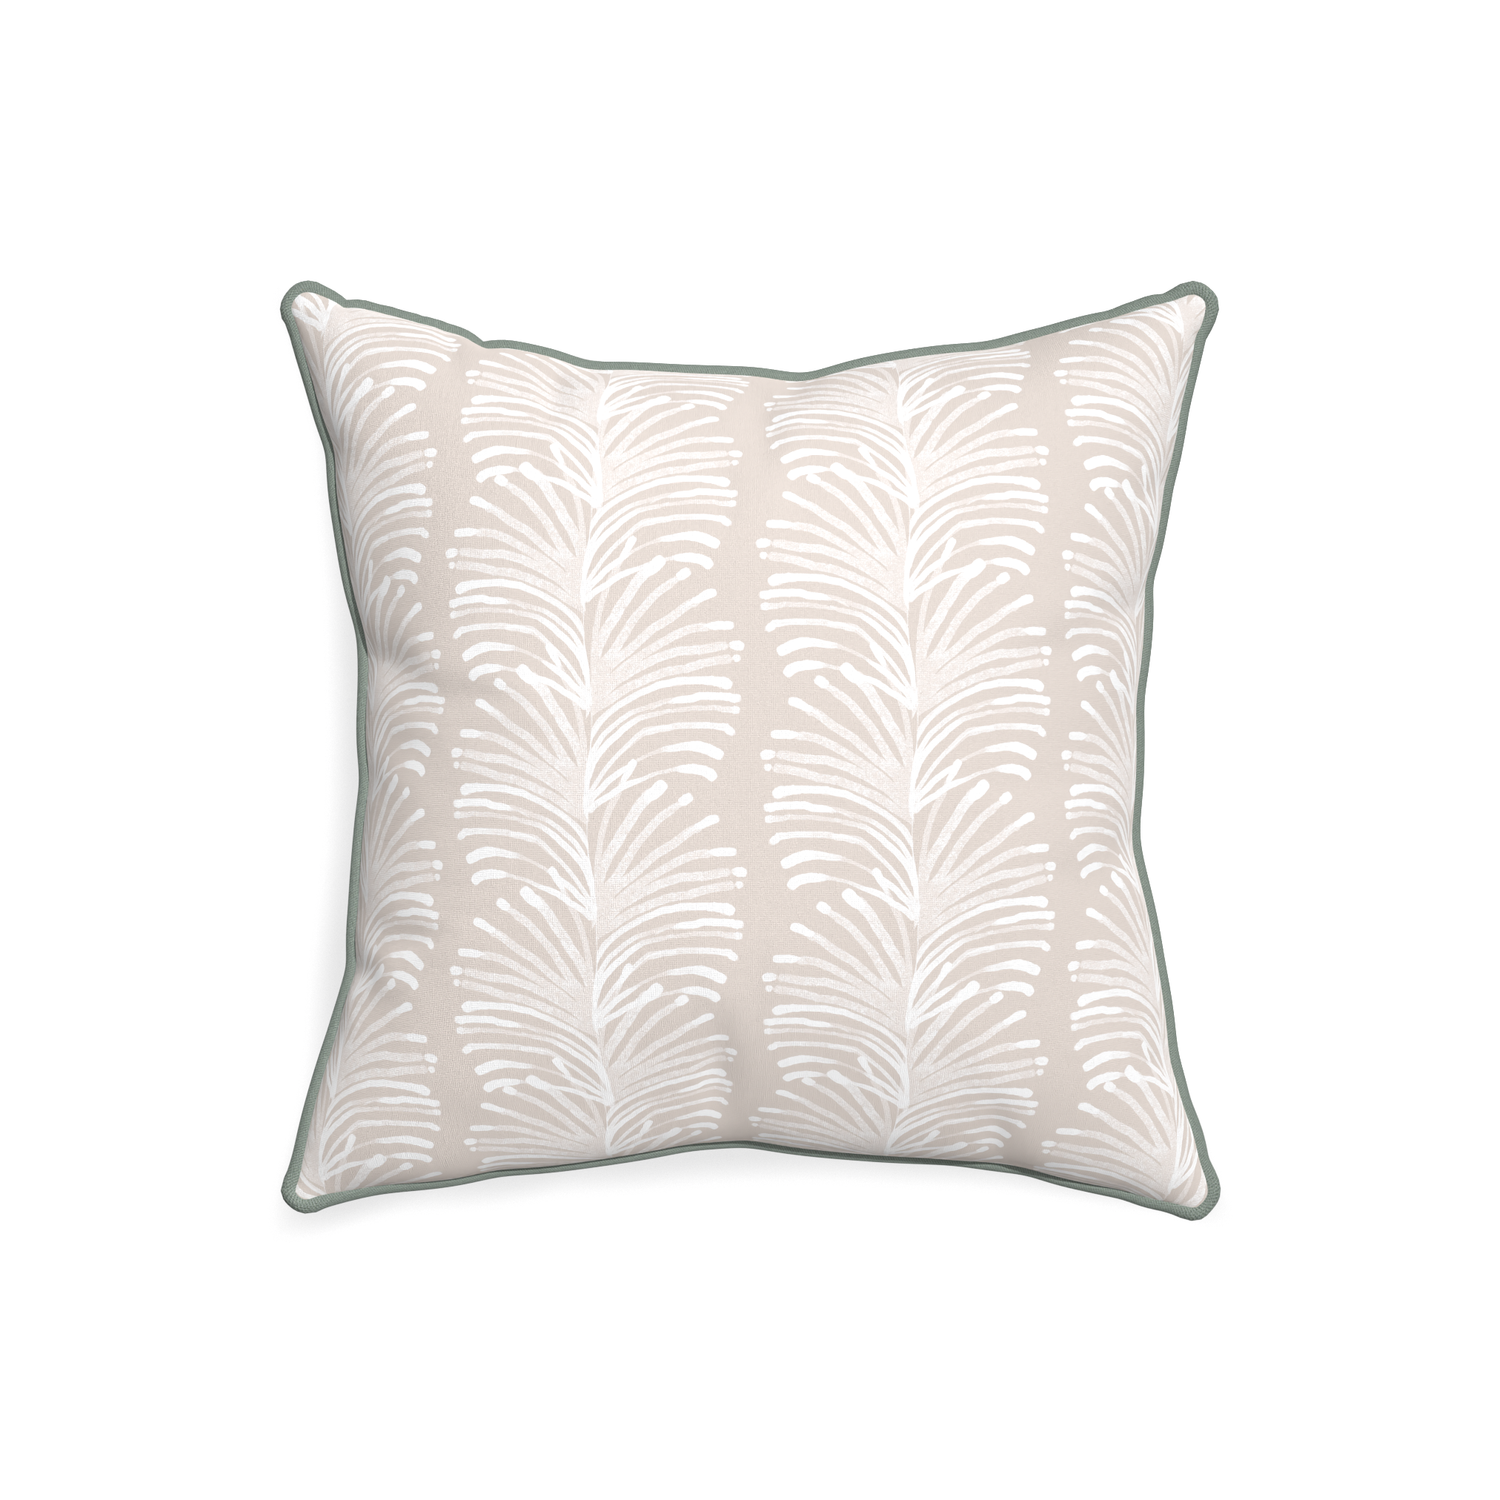 20-square emma sand custom sand colored botanical stripepillow with sage piping on white background